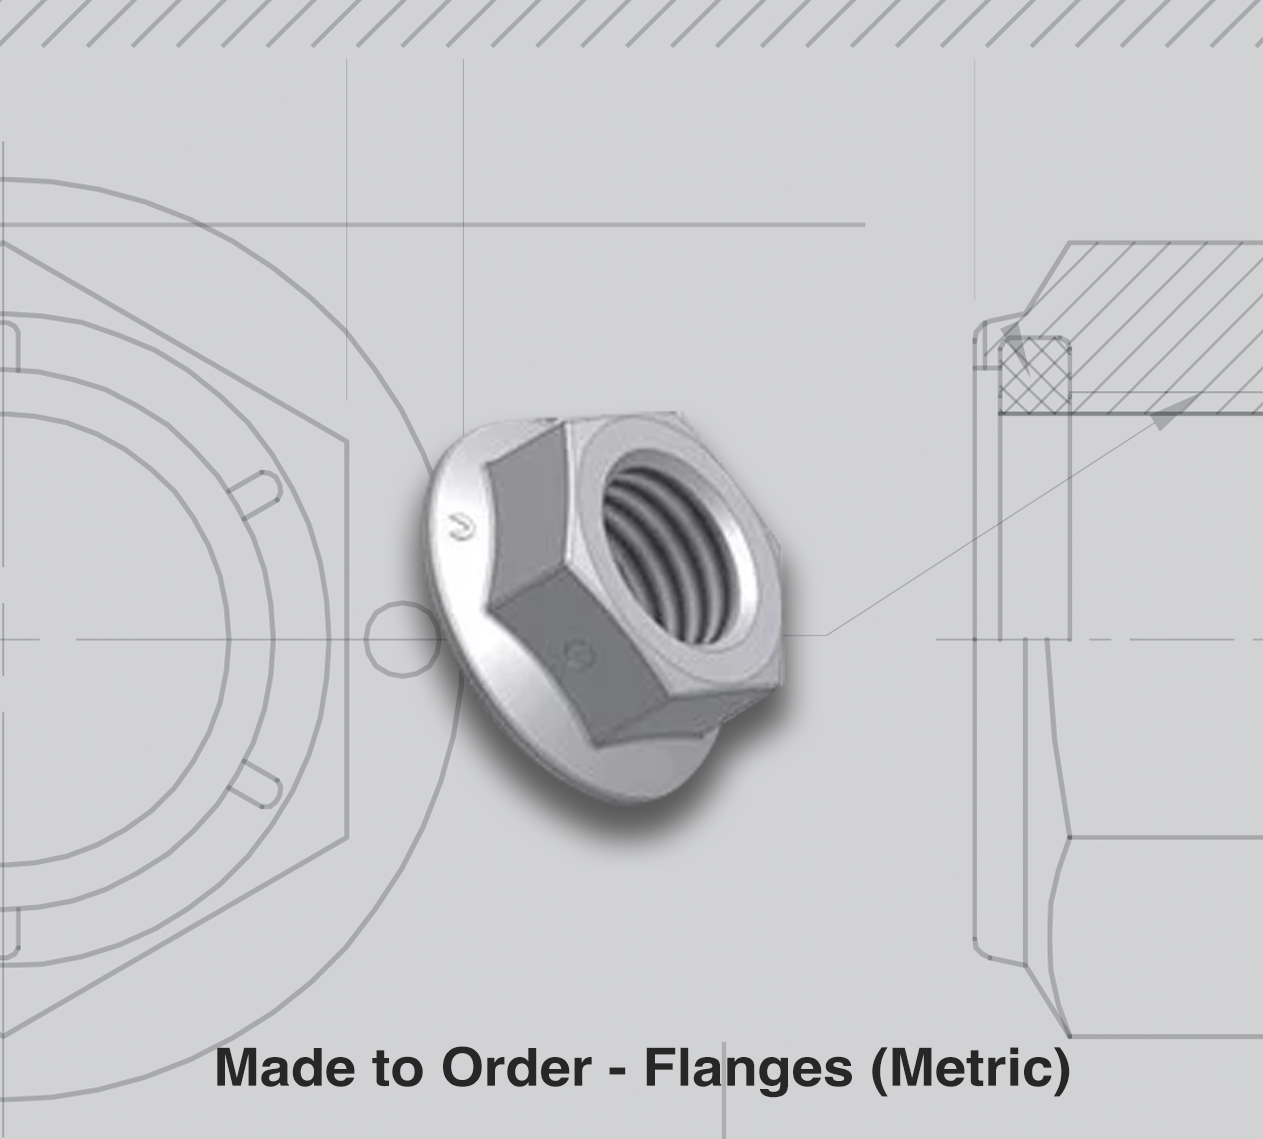 Made to Order - Flanges (Metric)